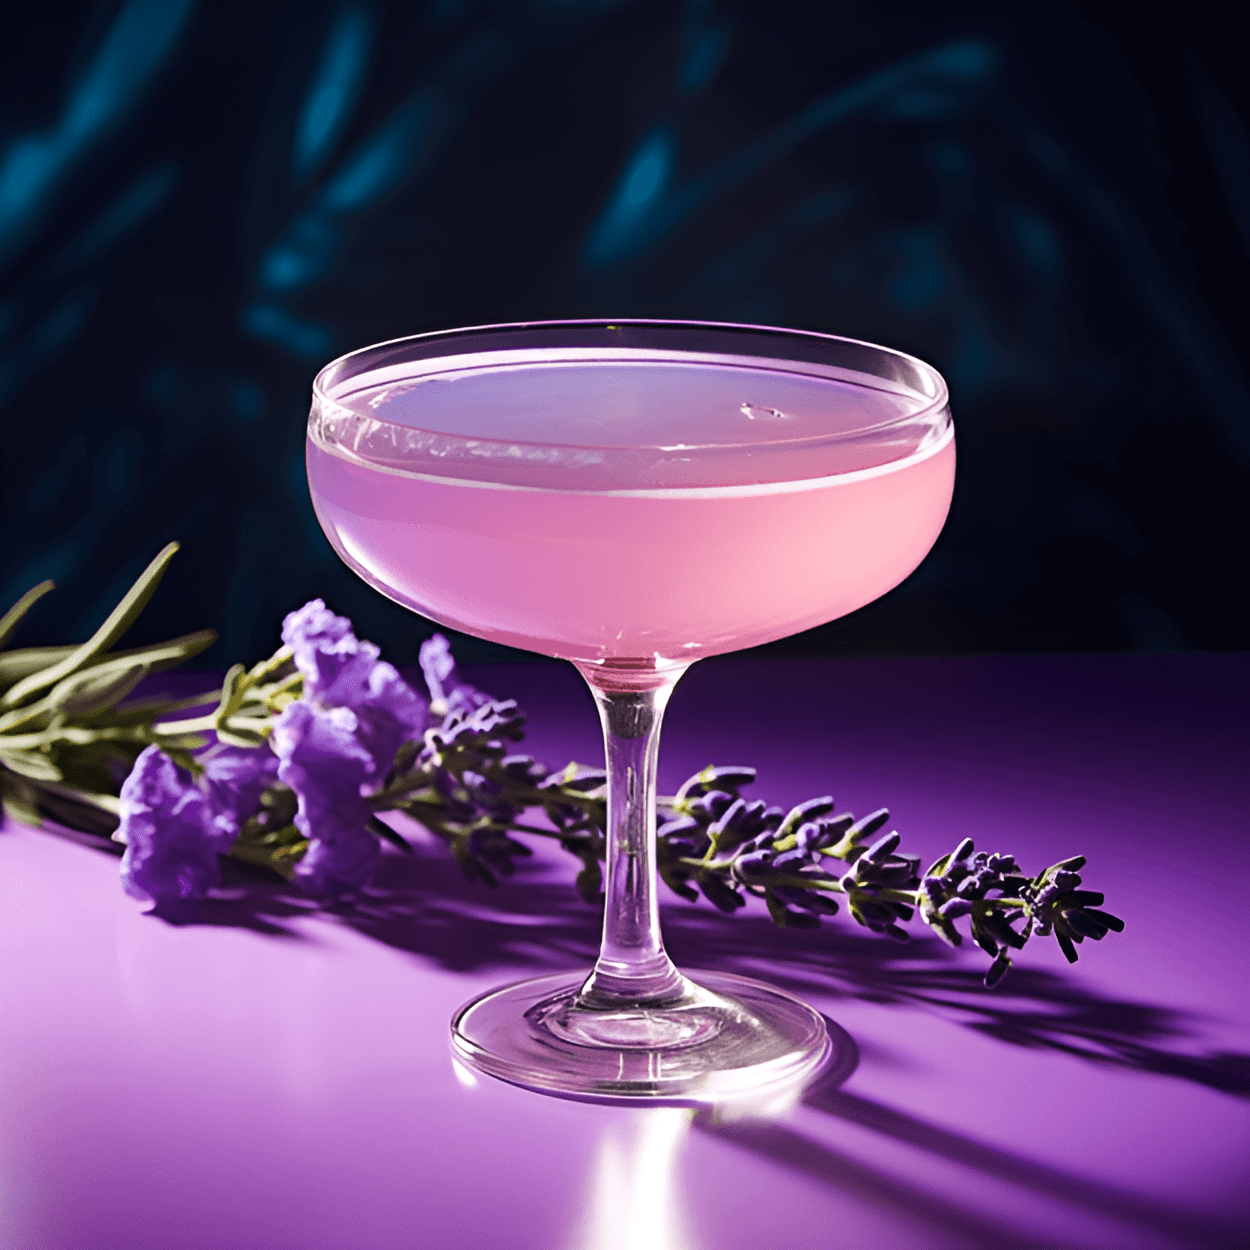 Lavender Aviation Cocktail Recipe - The Lavender Aviation is a delightful mix of sweet, sour, and floral notes. The gin provides a strong, juniper-forward base, while the lemon juice adds a tart freshness. The maraschino liqueur brings a touch of sweetness, and the lavender simple syrup introduces a delicate floral aroma and flavor that lingers on the palate.